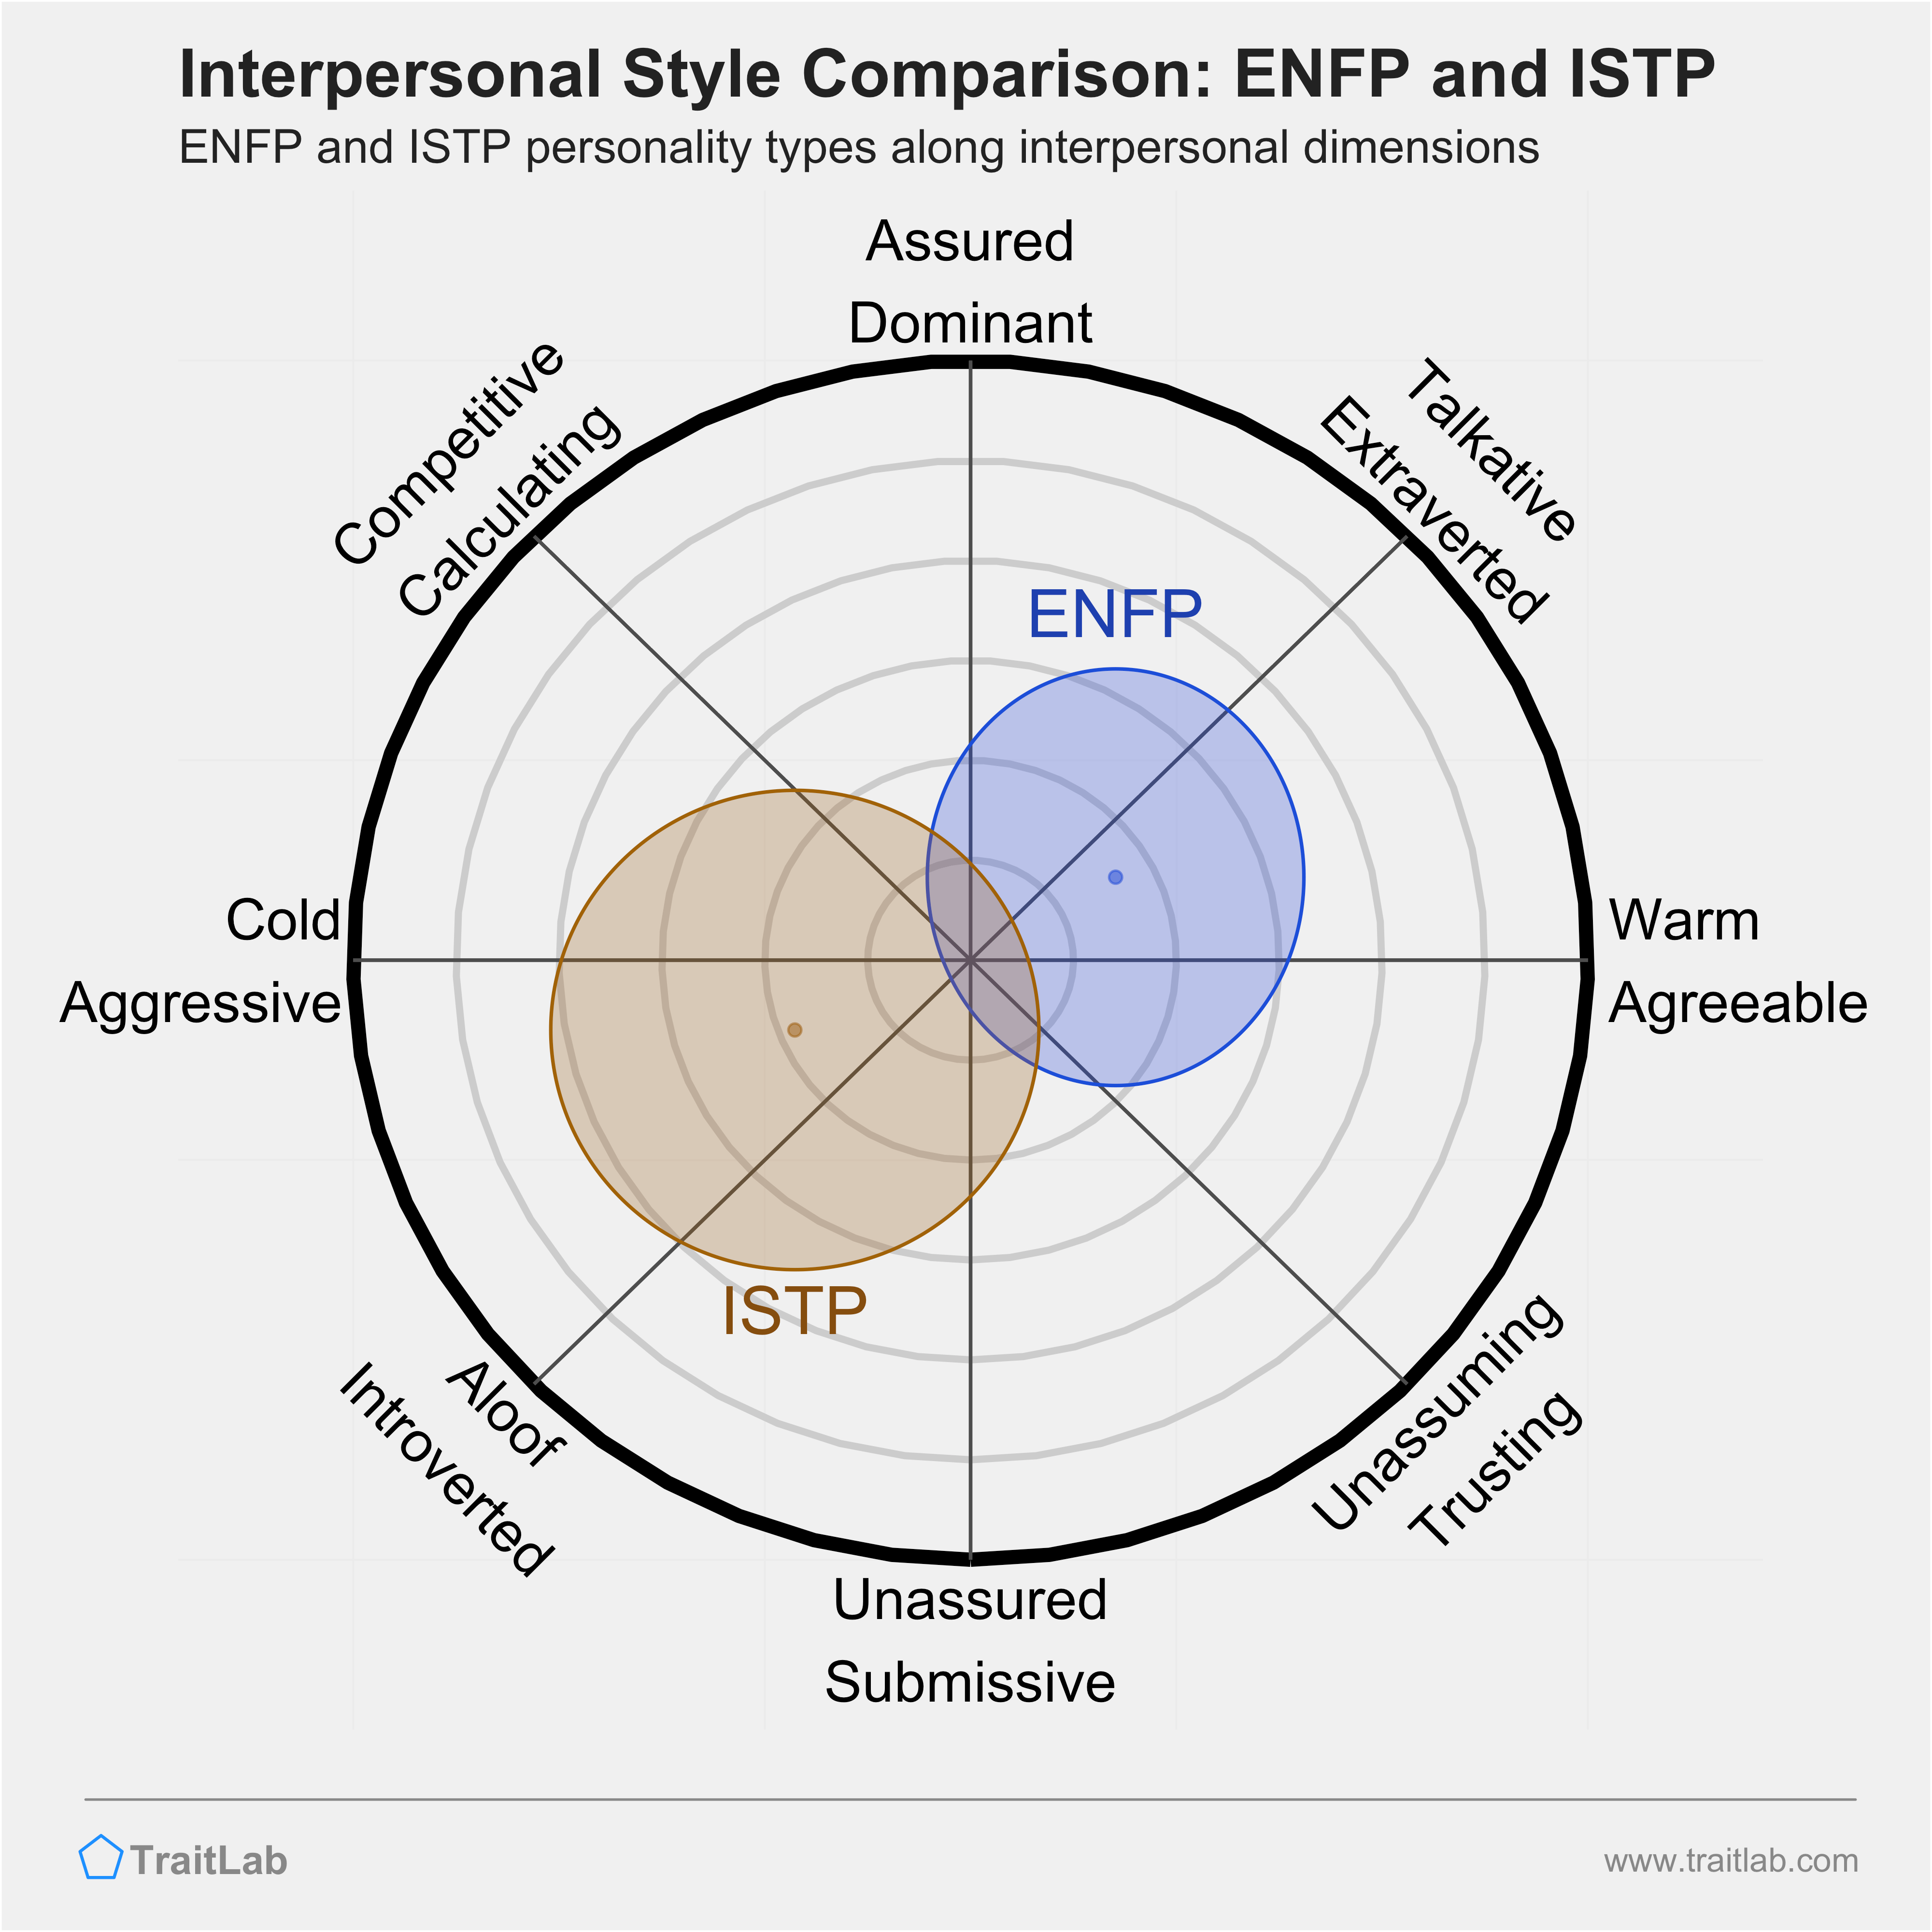 ENFP and ISTP comparison across interpersonal dimensions